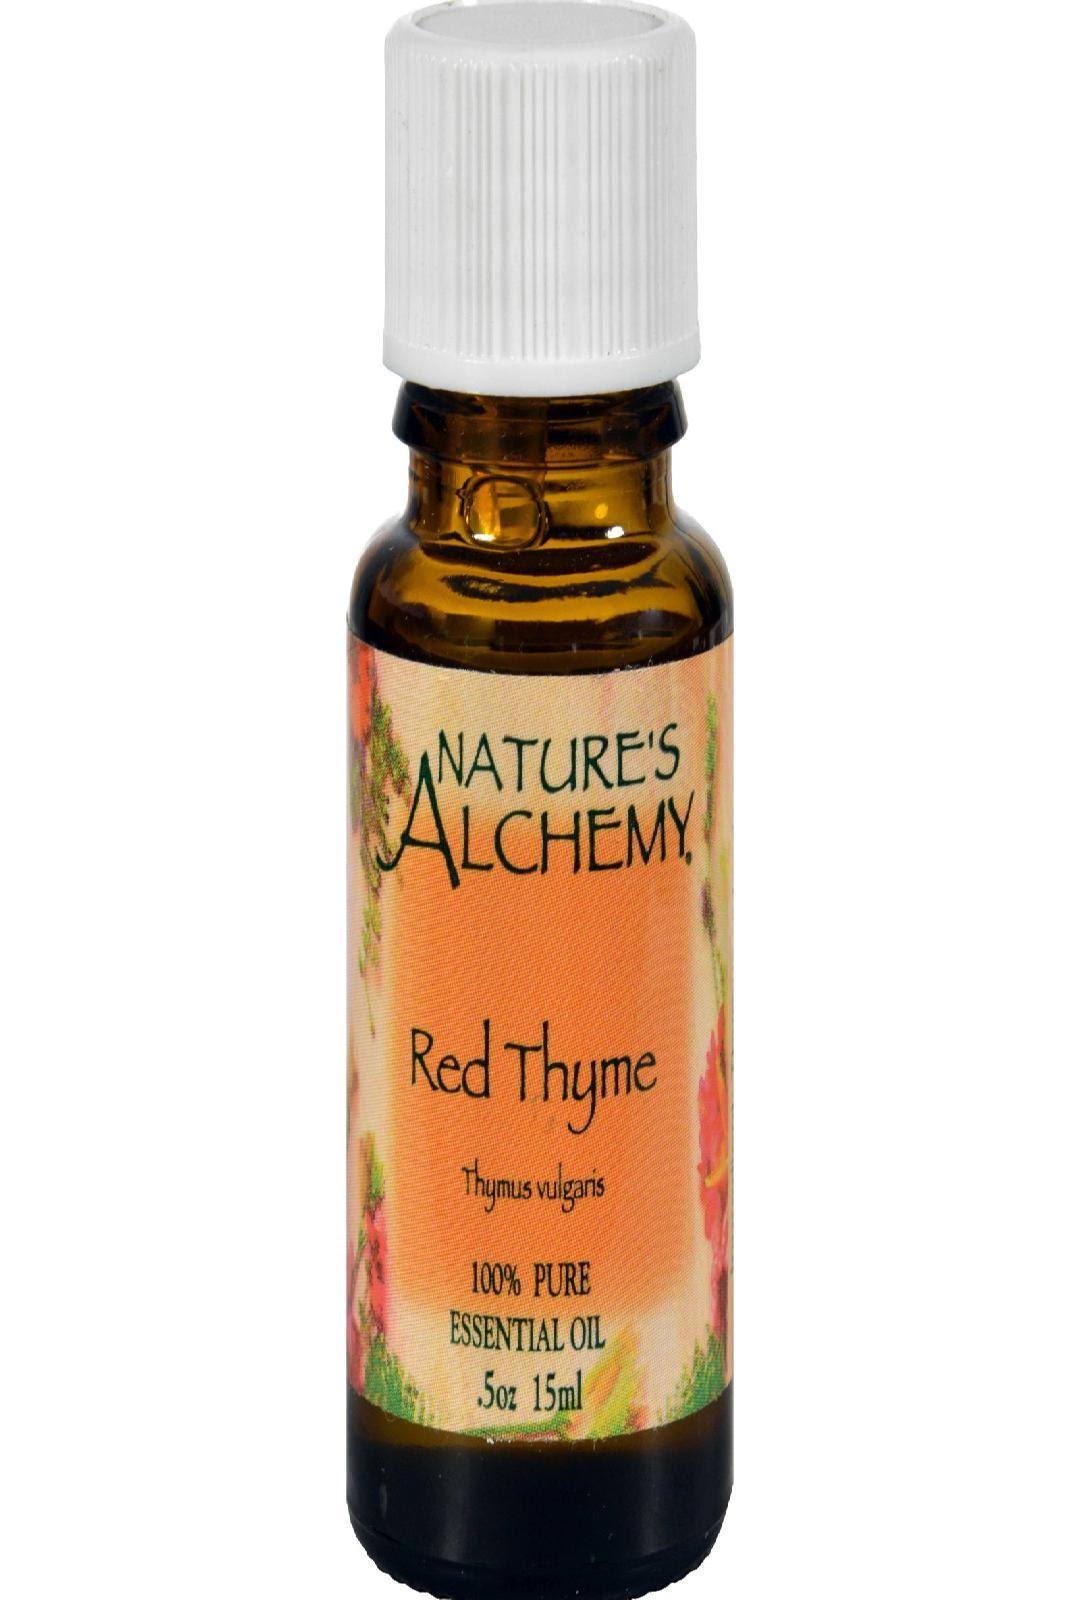 Nature's Alchemy 100% Pure Essential Oil - Red Thyme, 0.5oz